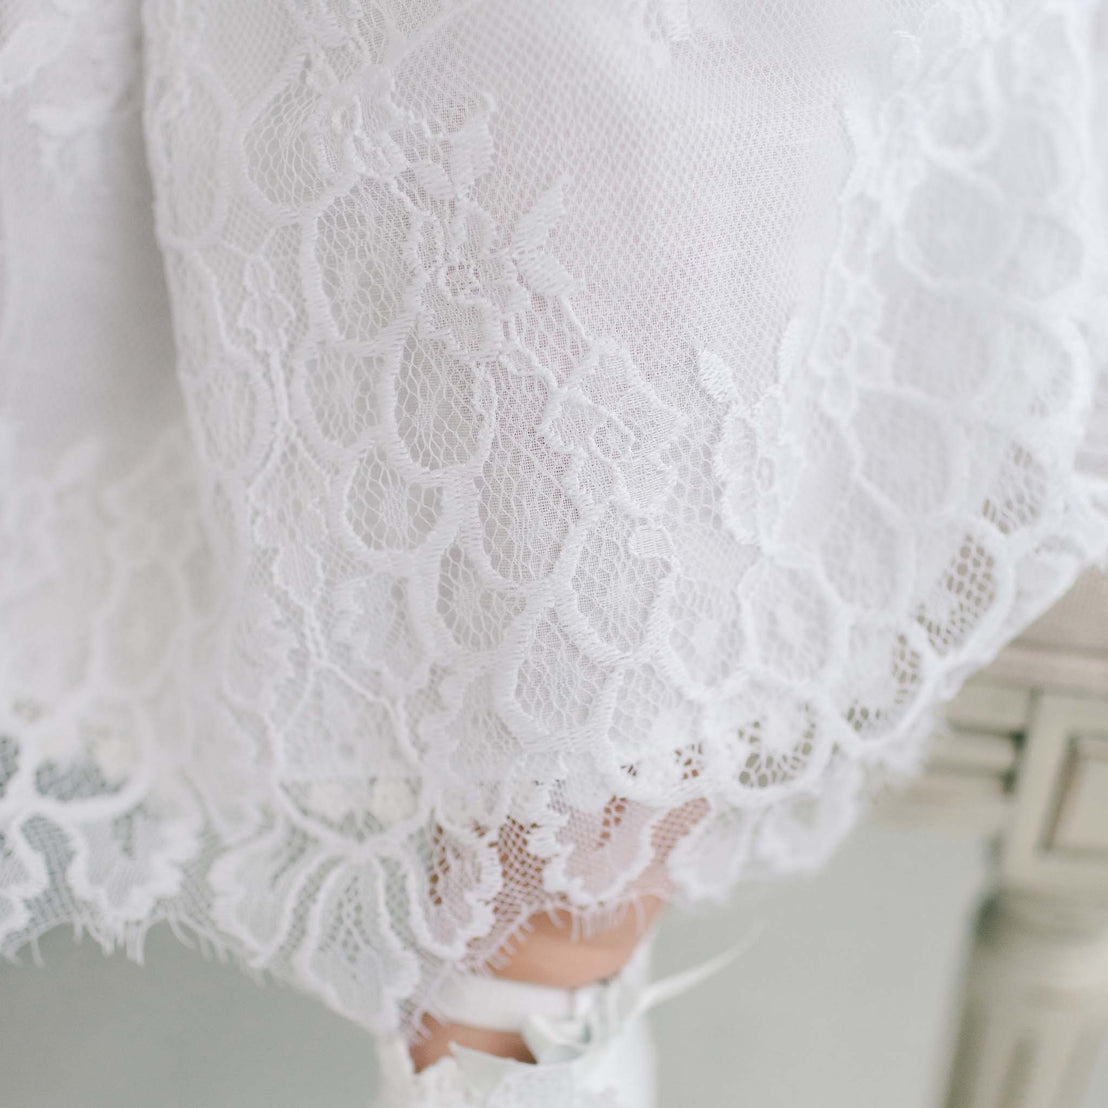 Close-up view of a baby wearing the Olivia Dress, featuring an heirloom-quality floral lace pattern on the sleeves, perfect for a baptism.